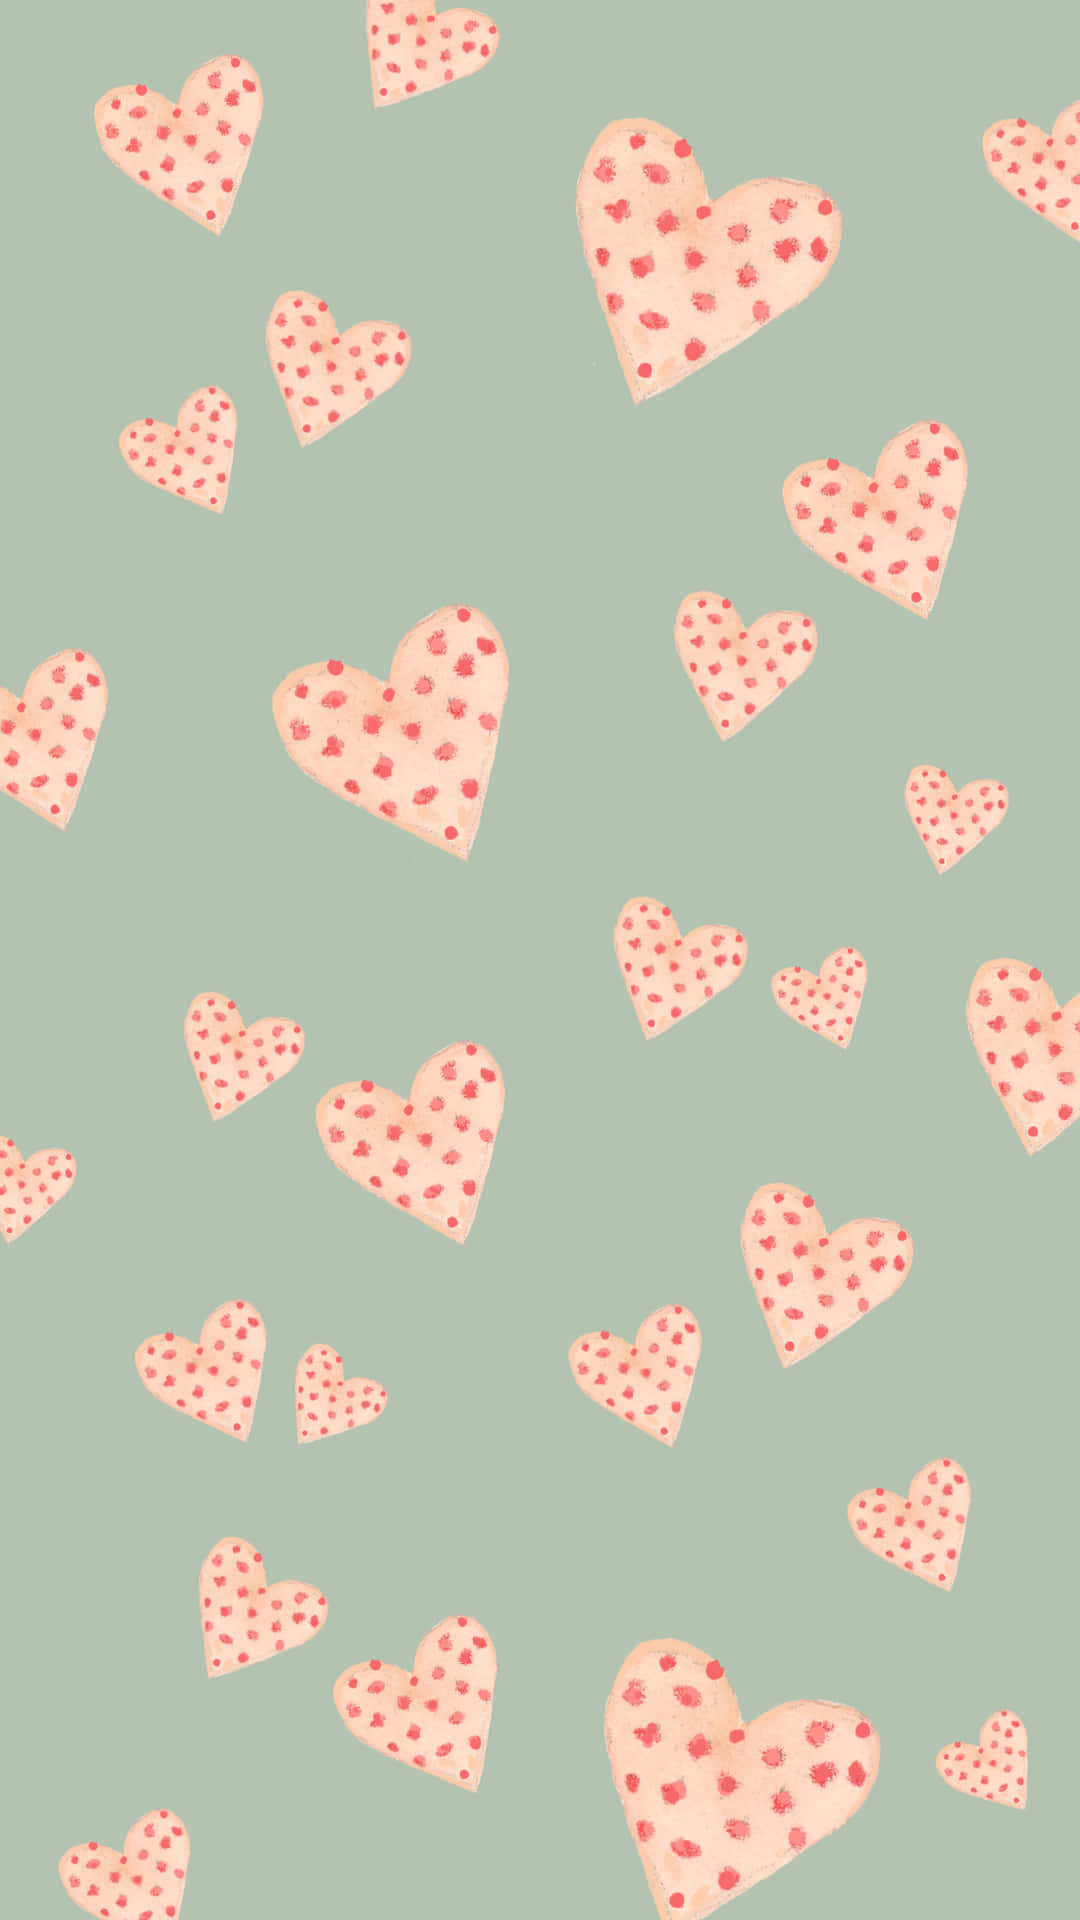 Celebrate Love on Valentines Day with a Special Phone Wallpaper